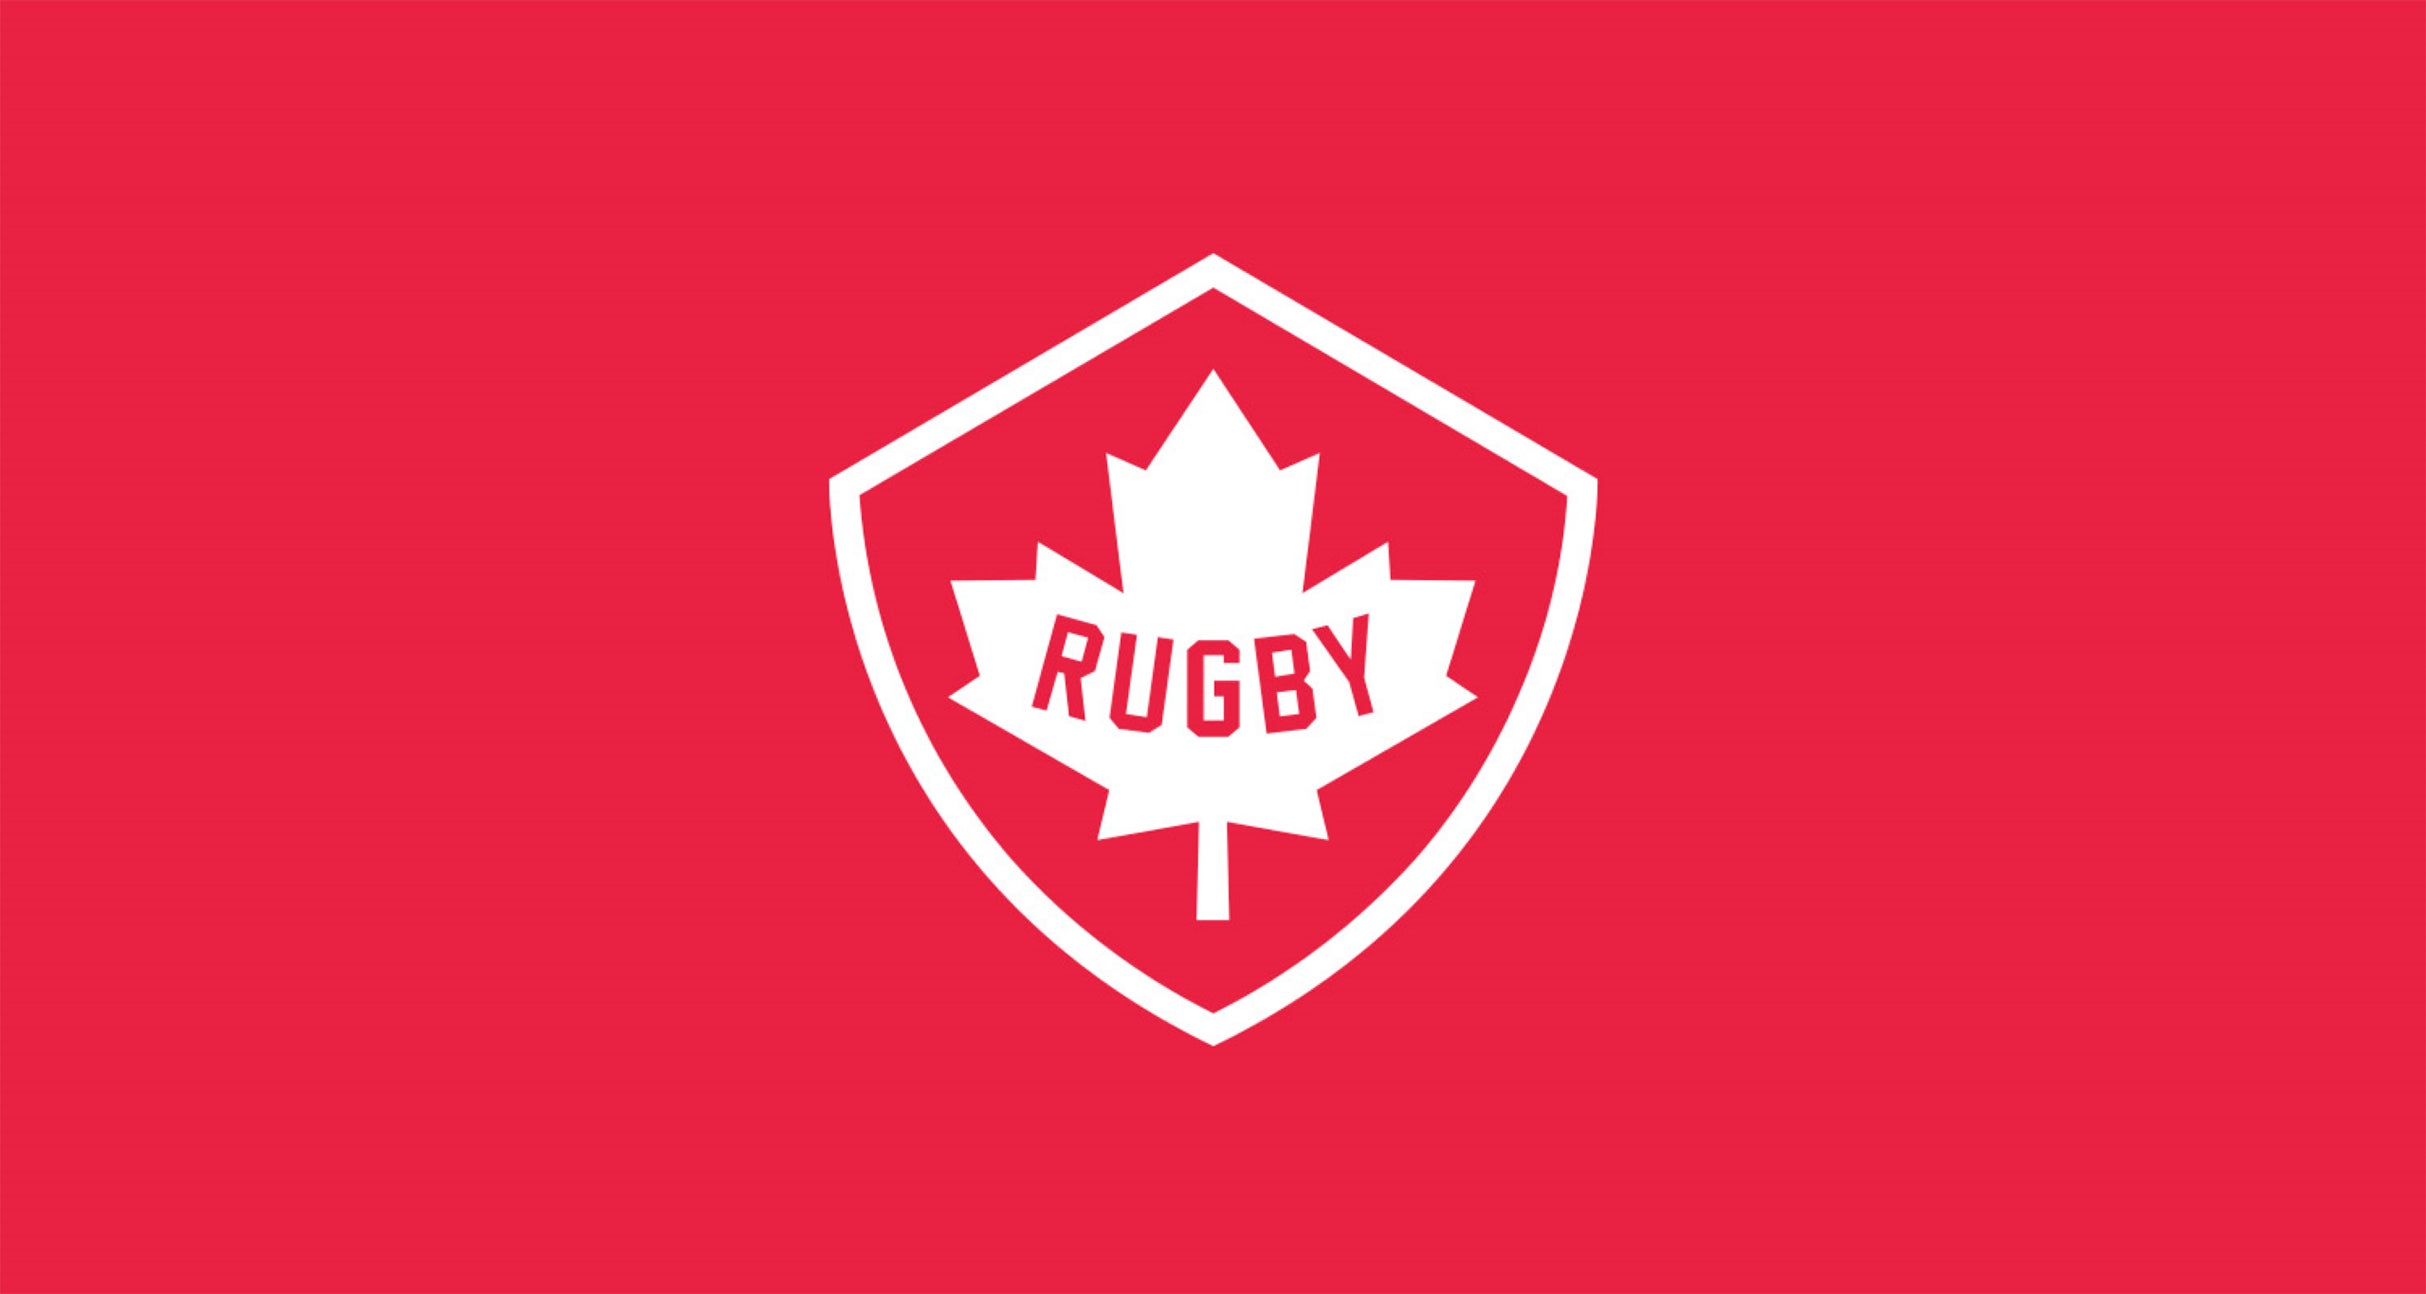 Rugby Sevens, Paris 2024 Qualification Event Package in Victoria promo photo for Rugby Canada / CW7 Database presale offer code